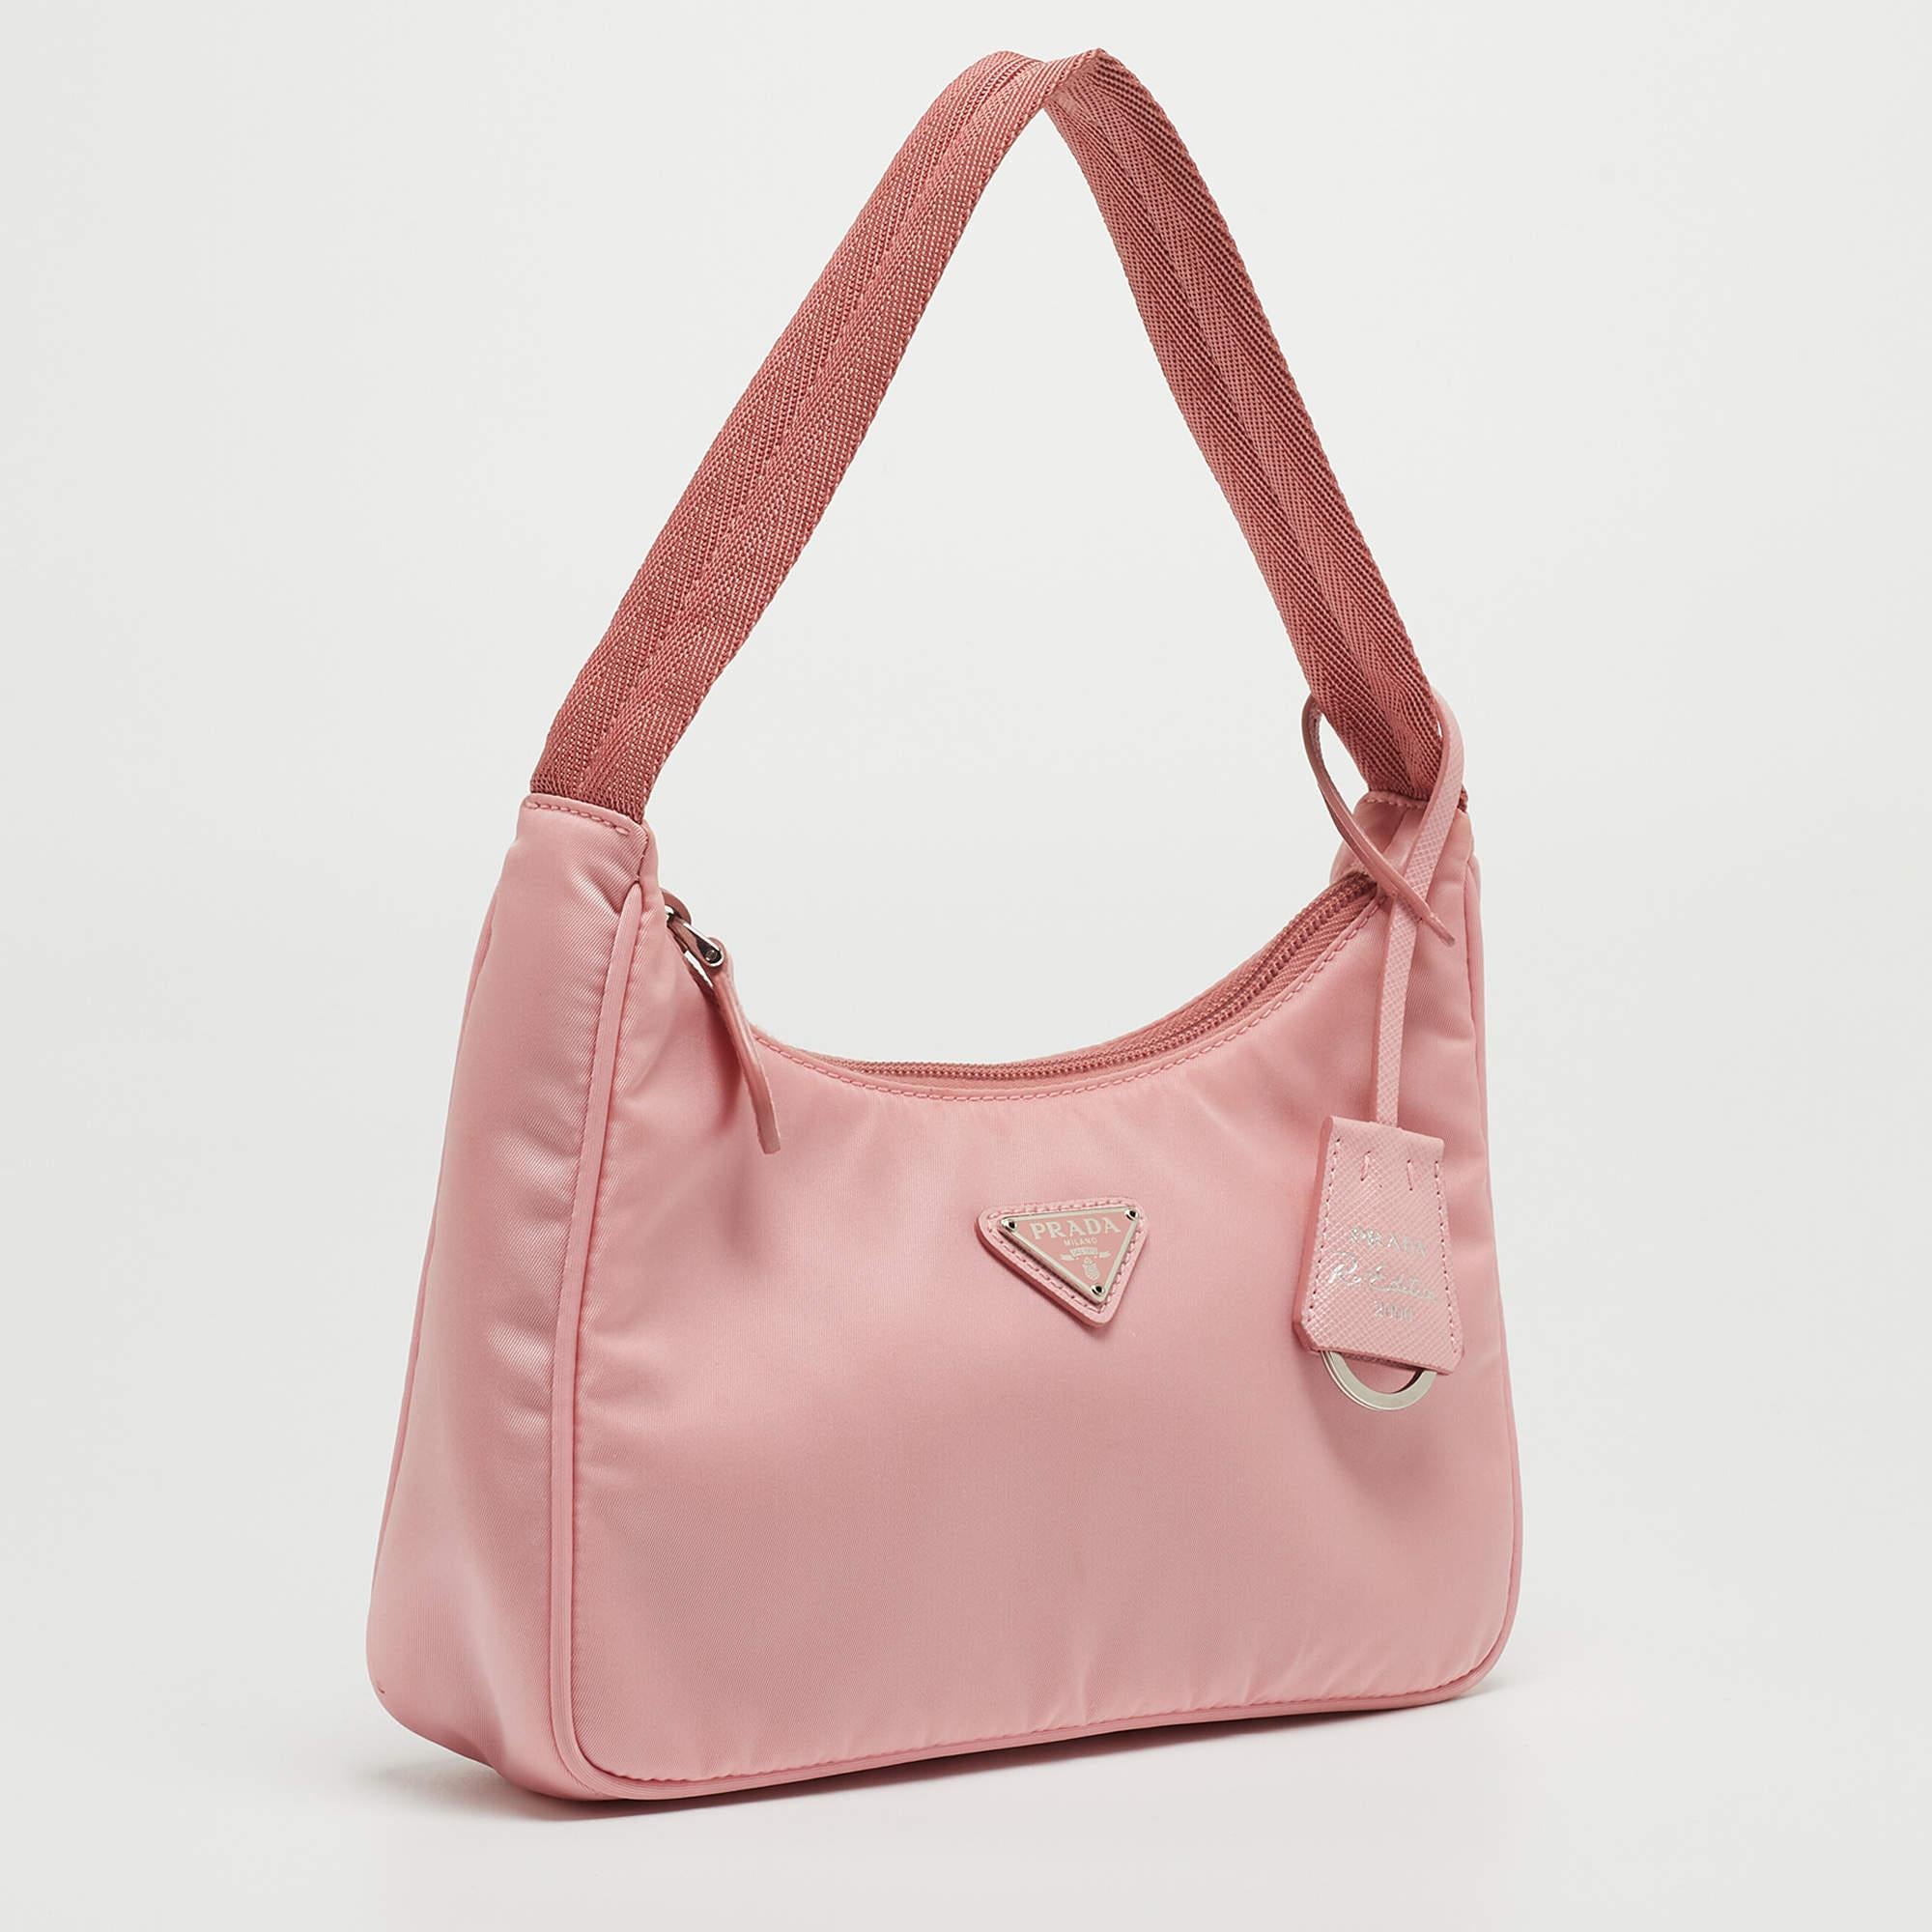 The petite silhouette and classic elements made the Prada Re-Edition 2000 bag an instant hit among fashionistas. With a timeless appeal, this creation comes made from nylon and features a single handle at the top. The perfectly sized interior of the